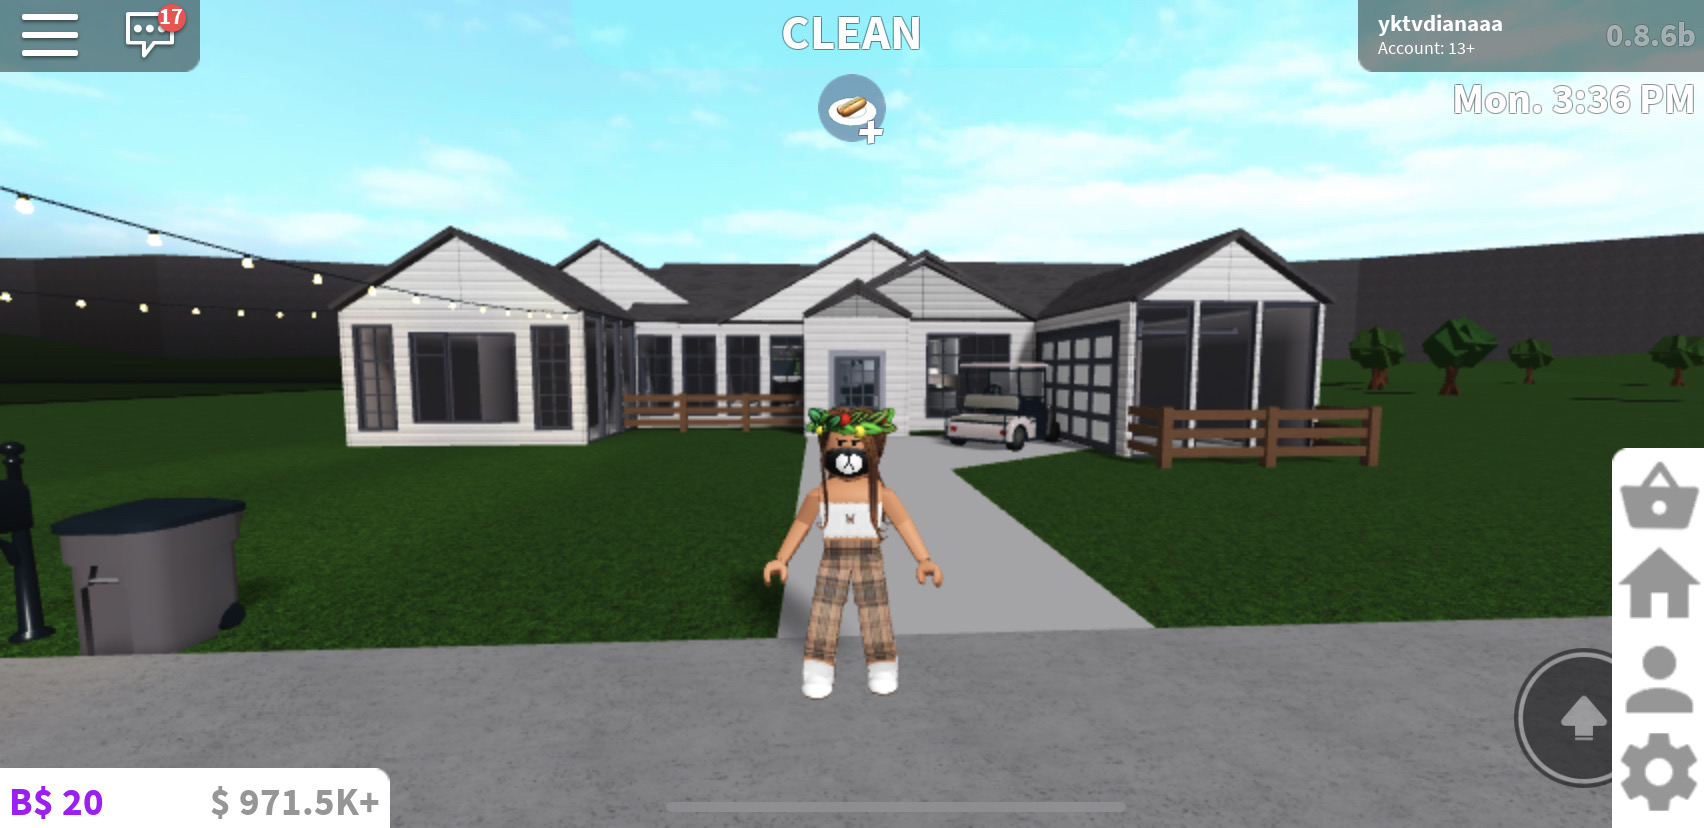 Roblox Bloxburg Houses Building Image By Roblox - roblox bloxburg house builders